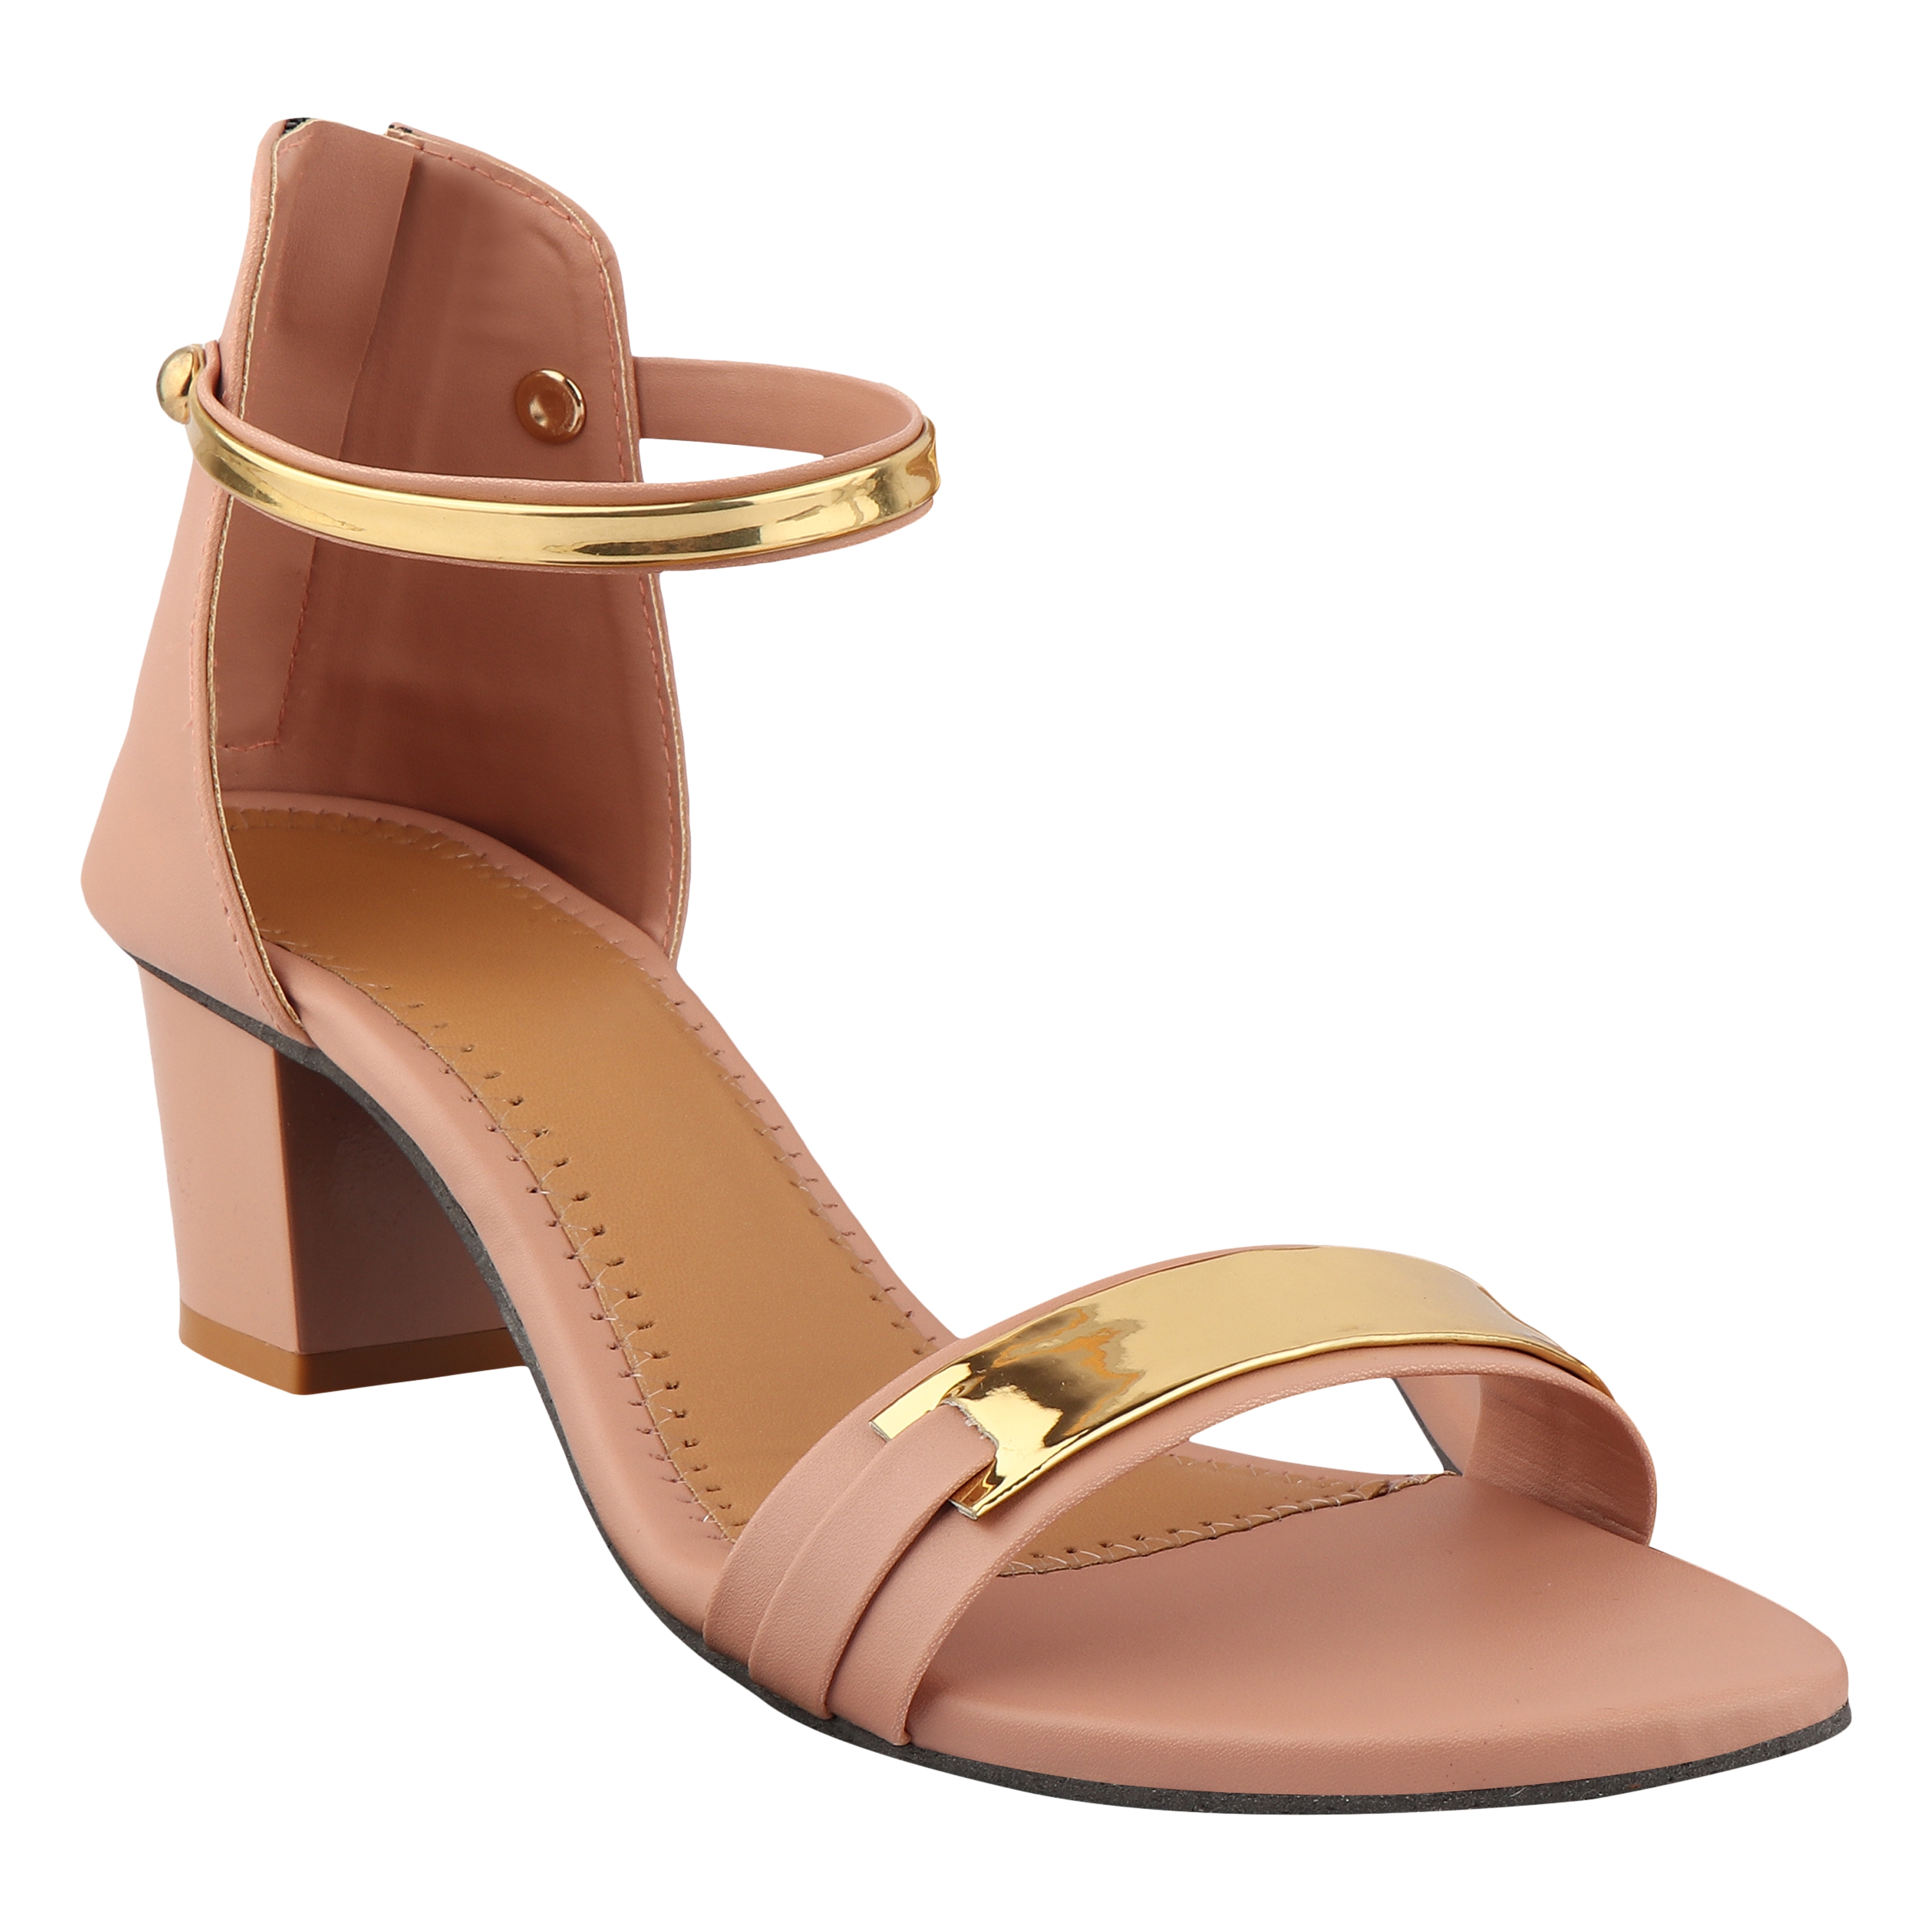 Buy Gold-Toned Heeled Sandals for Women by Inc.5 Online | Ajio.com